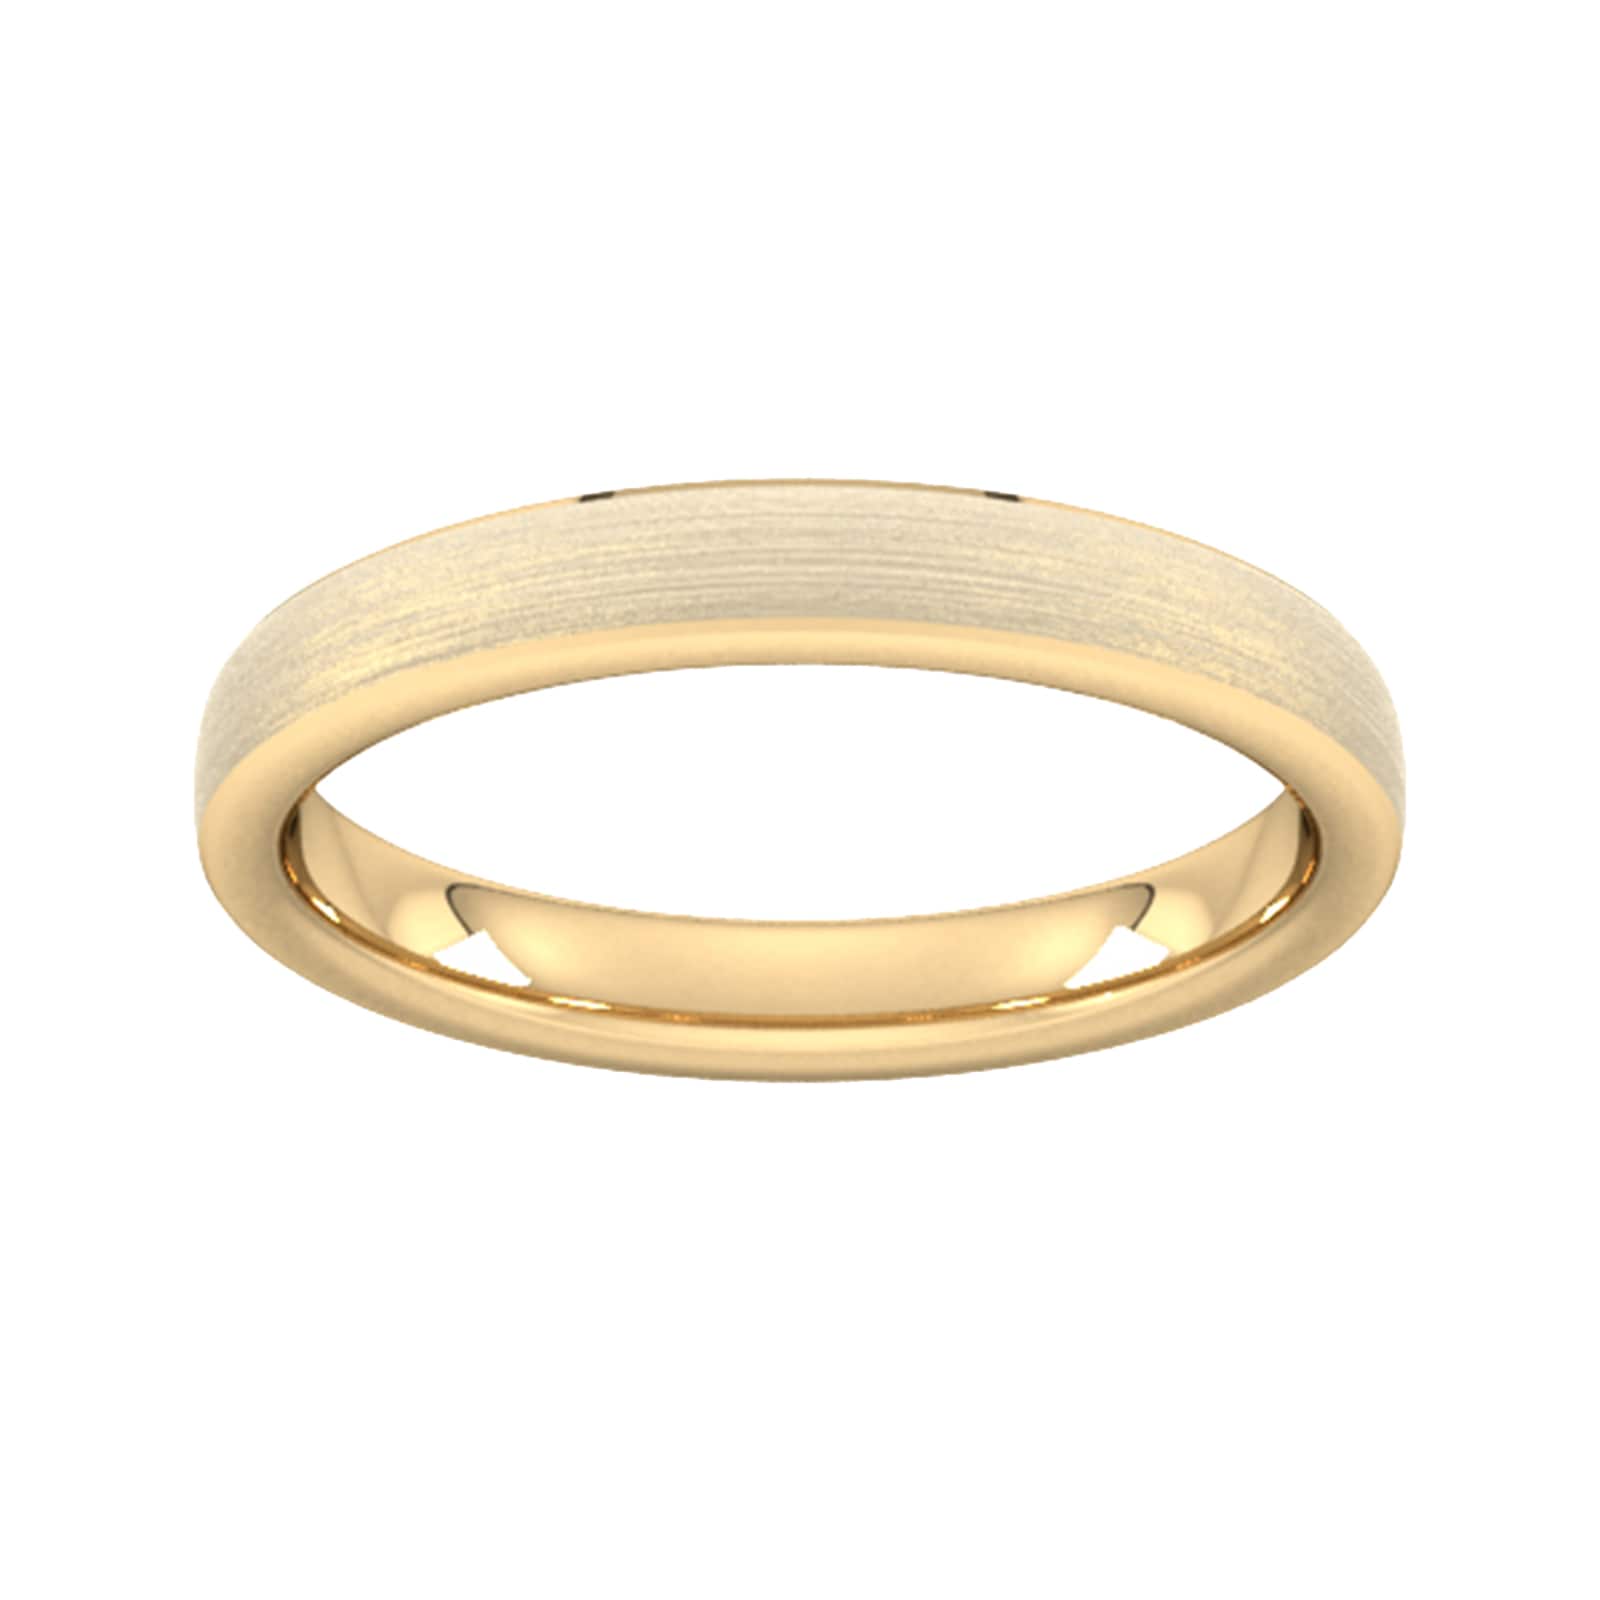 3mm Slight Court Standard Polished Chamfered Edges With Matt Centre Wedding Ring In 18 Carat Yellow Gold - Ring Size R